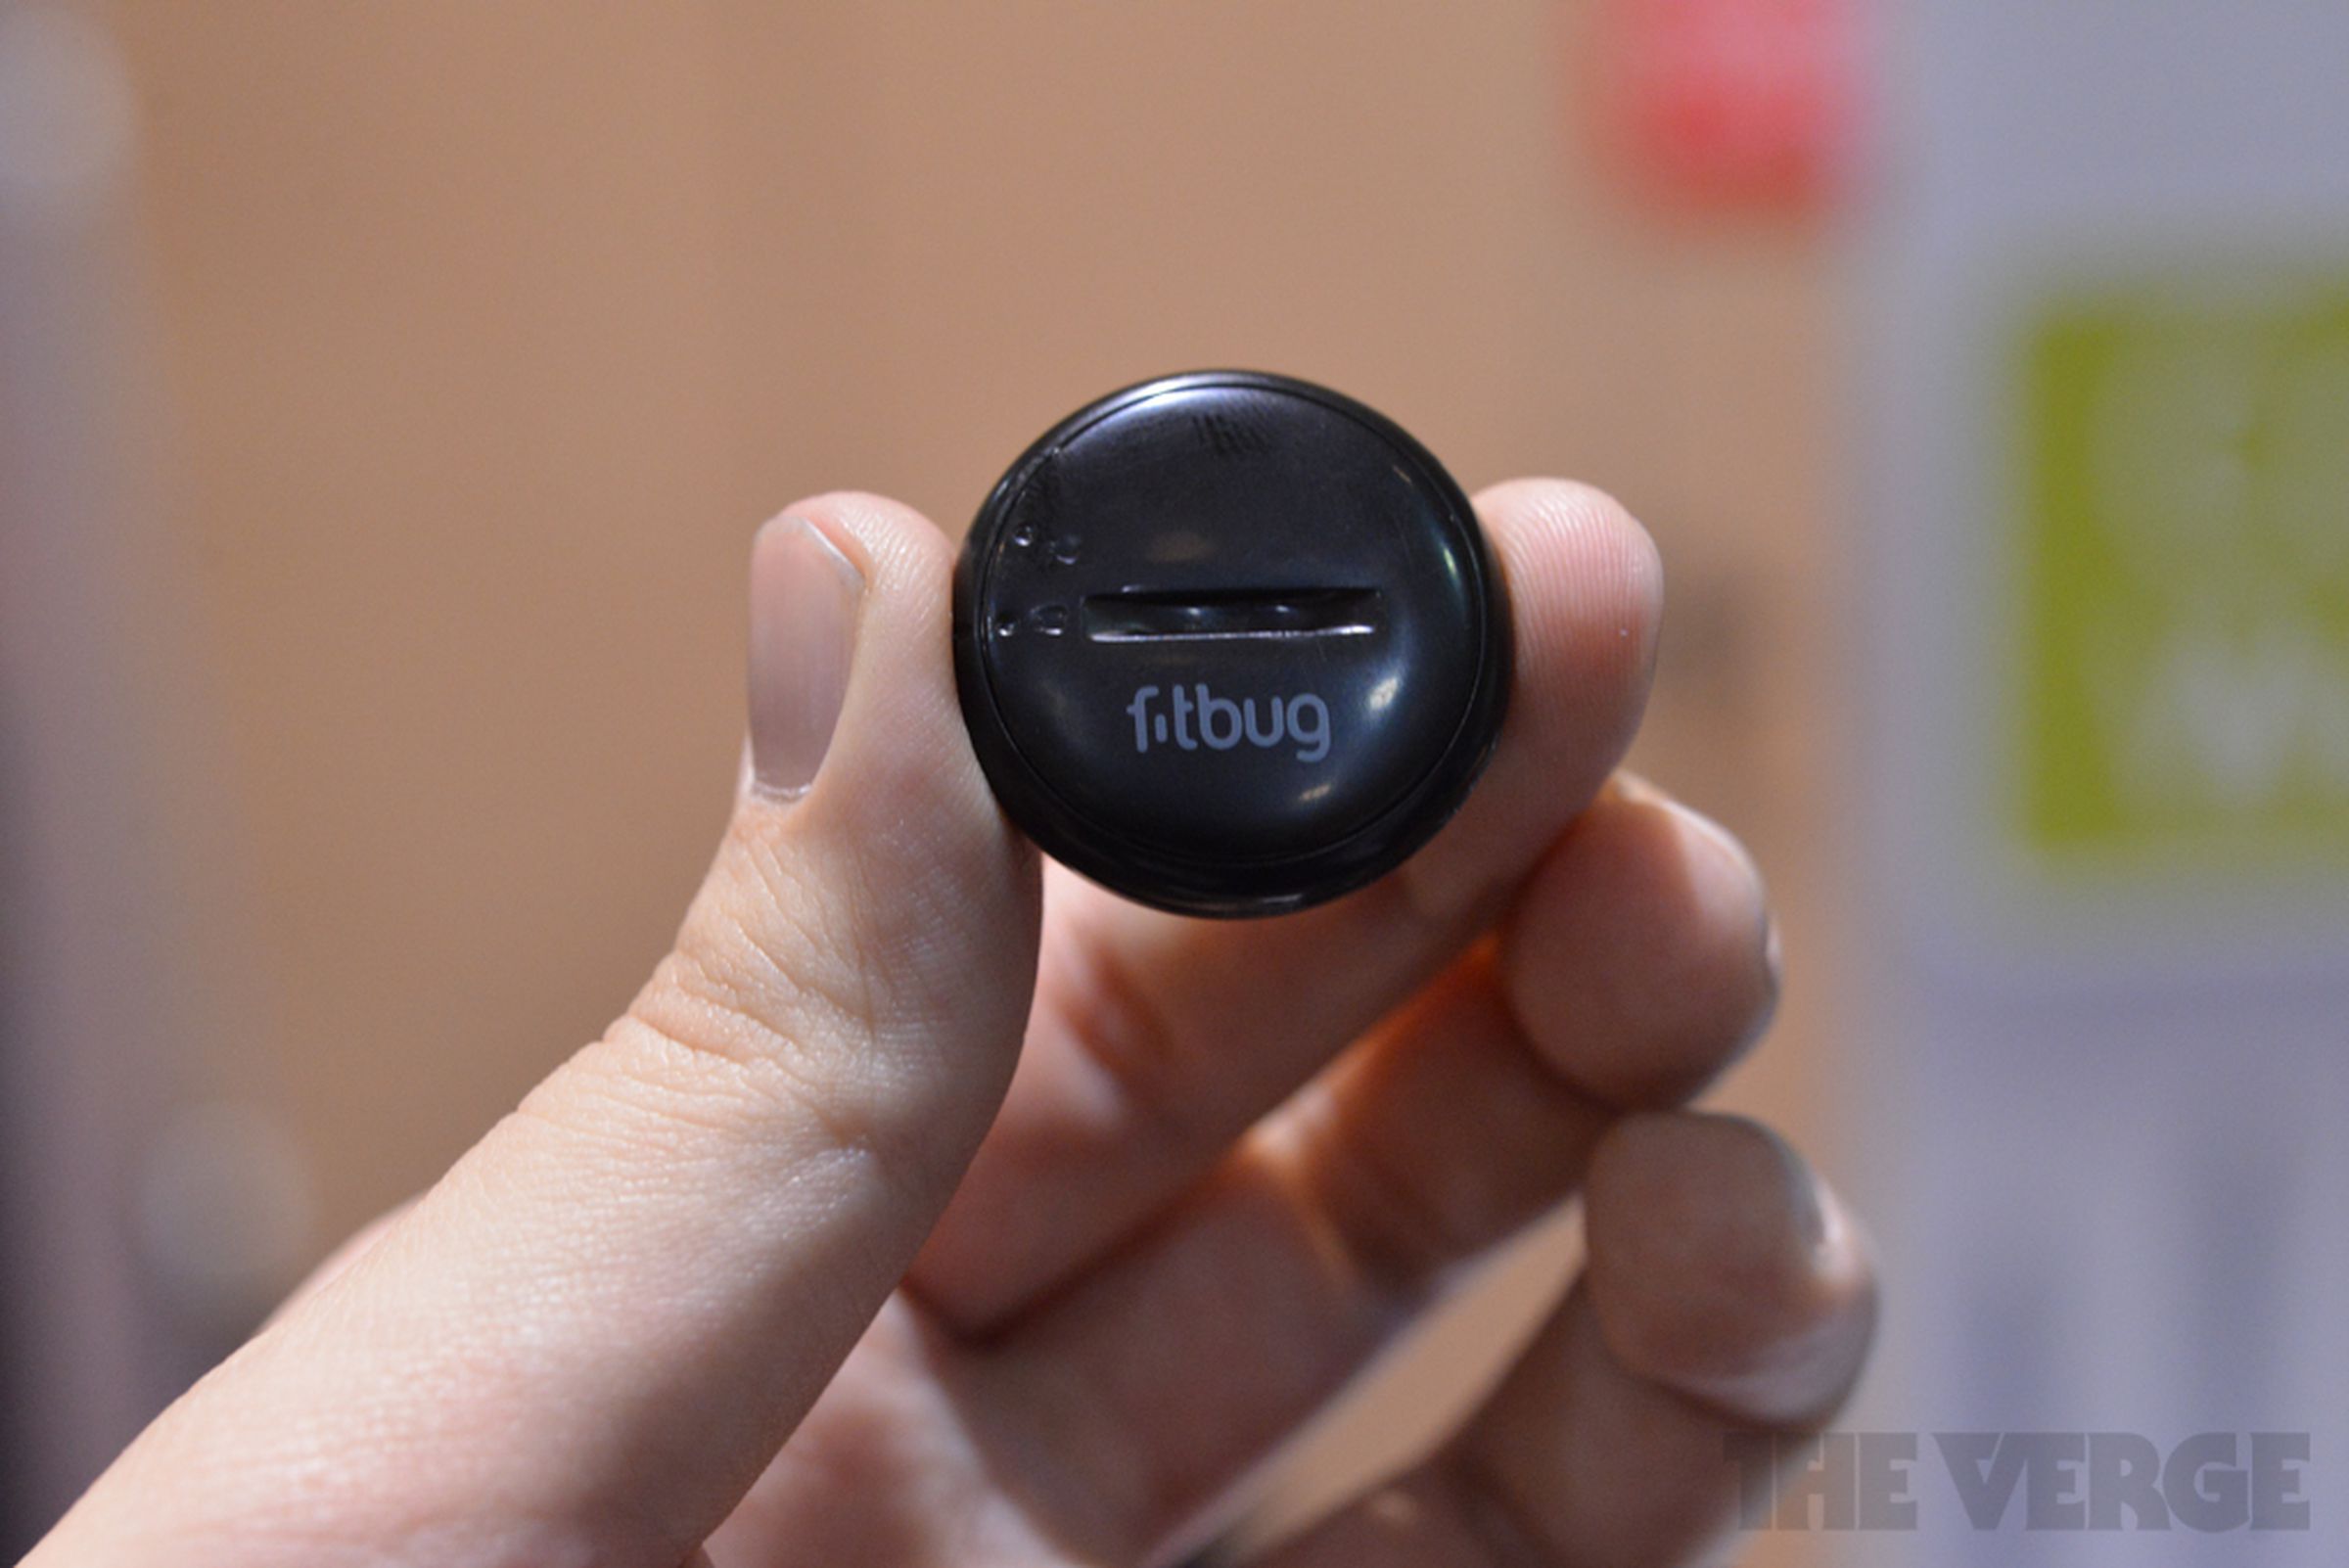 Fitbug Orb, Wow, and Luv hands-on pictures